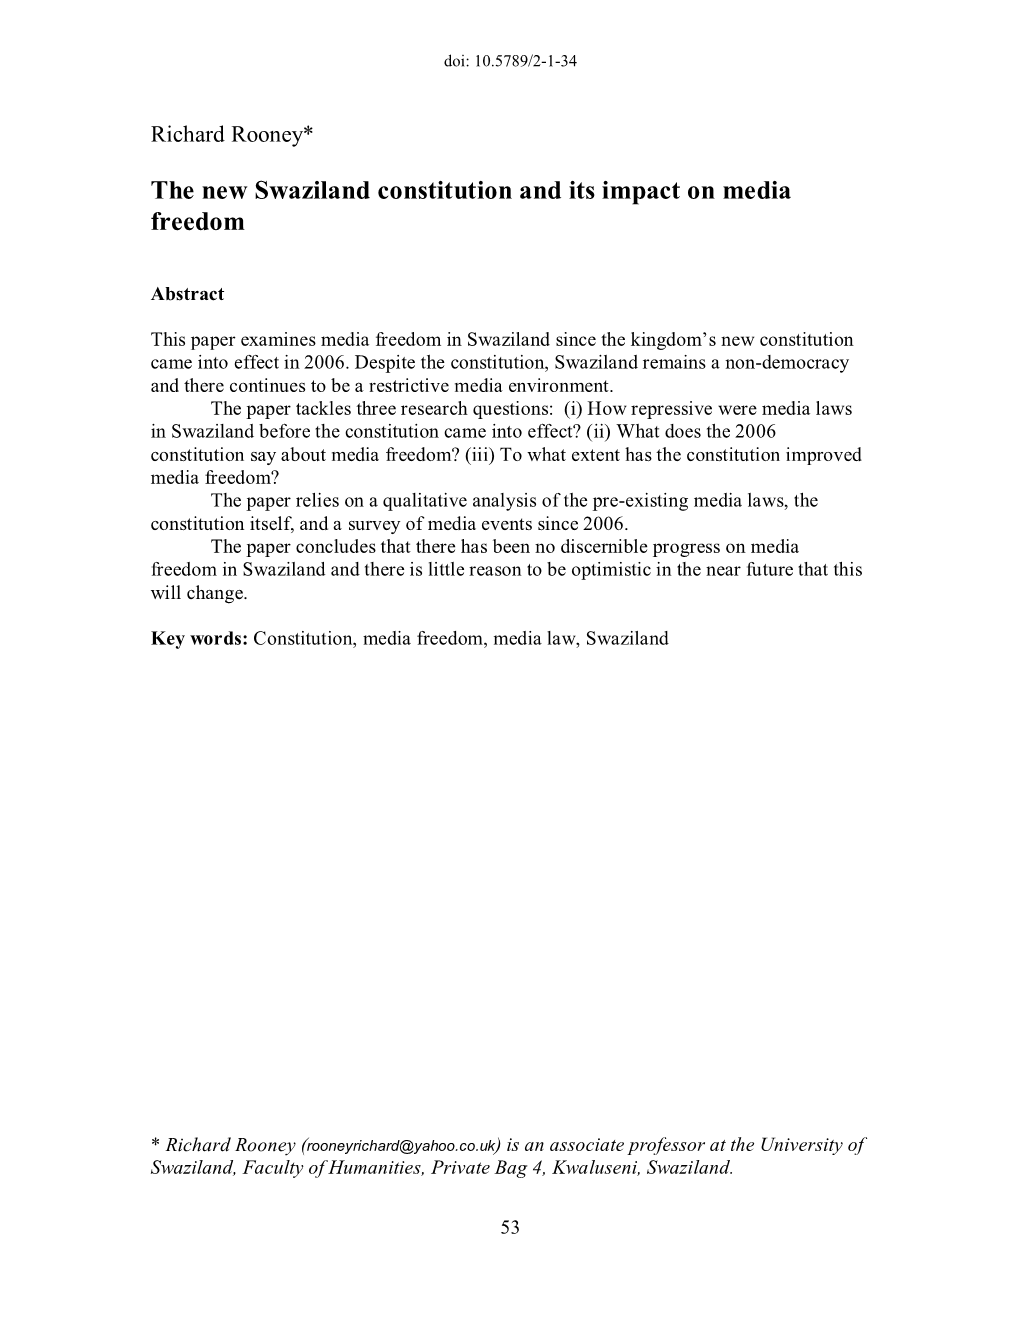 The New Swaziland Constitution and Its Impact on Media Freedom